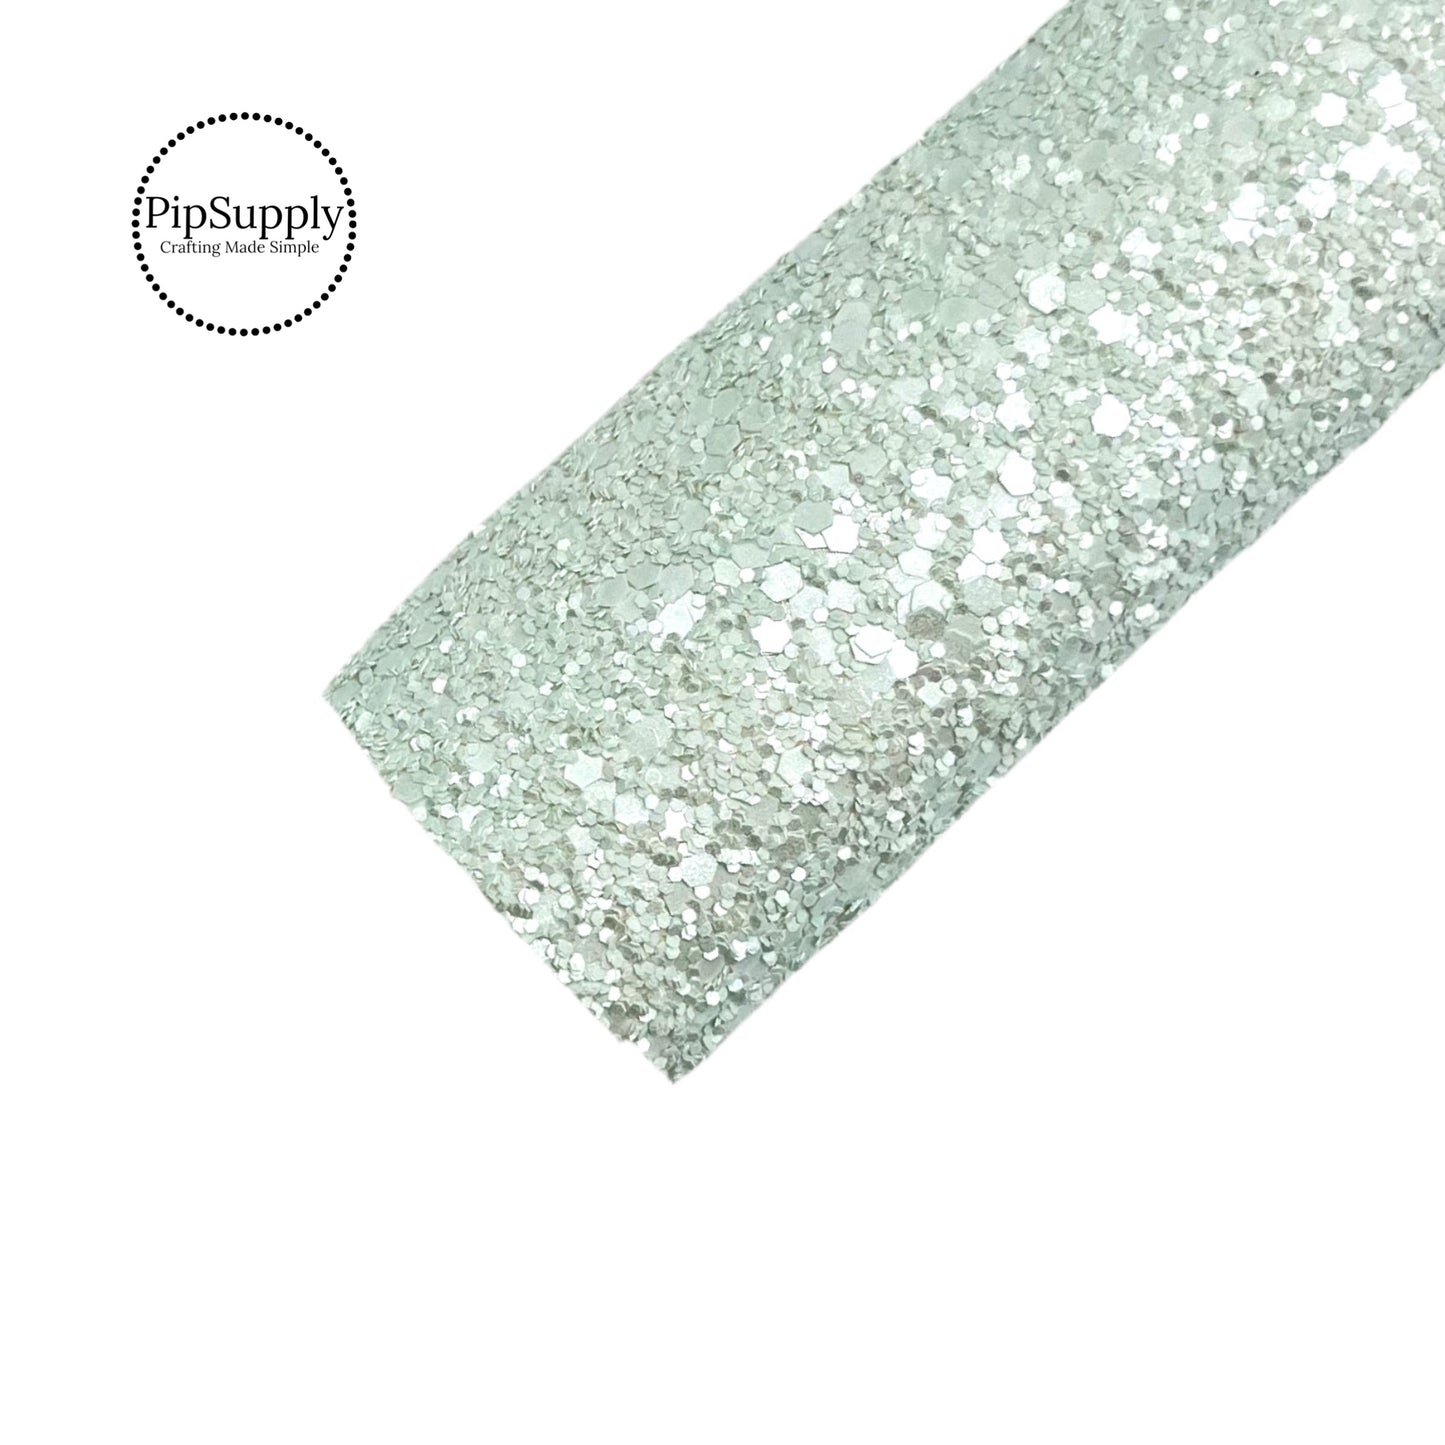 Pale blue solid frosted chunky glitter sheet